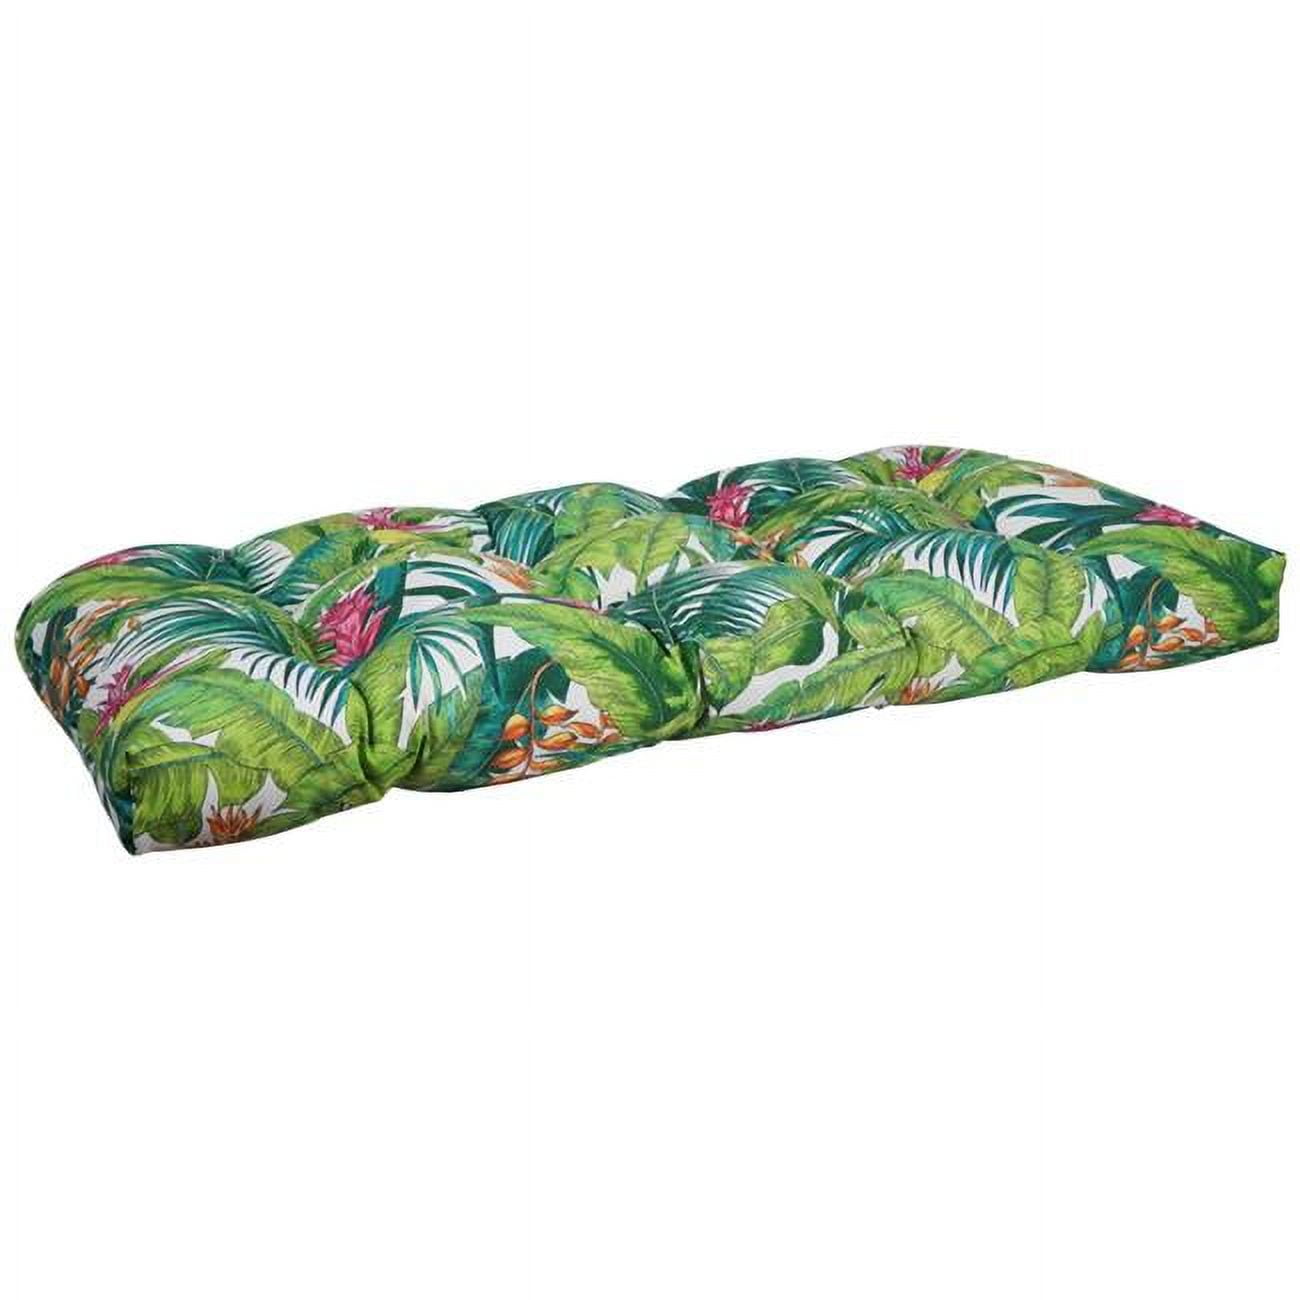 Picture of Blazing Needles 93180-LS-JO17-01 42 x 19 in. U-Shaped Patterned Spun Polyester Tufted Settee & Bench Cushion&#44; Corazon Island